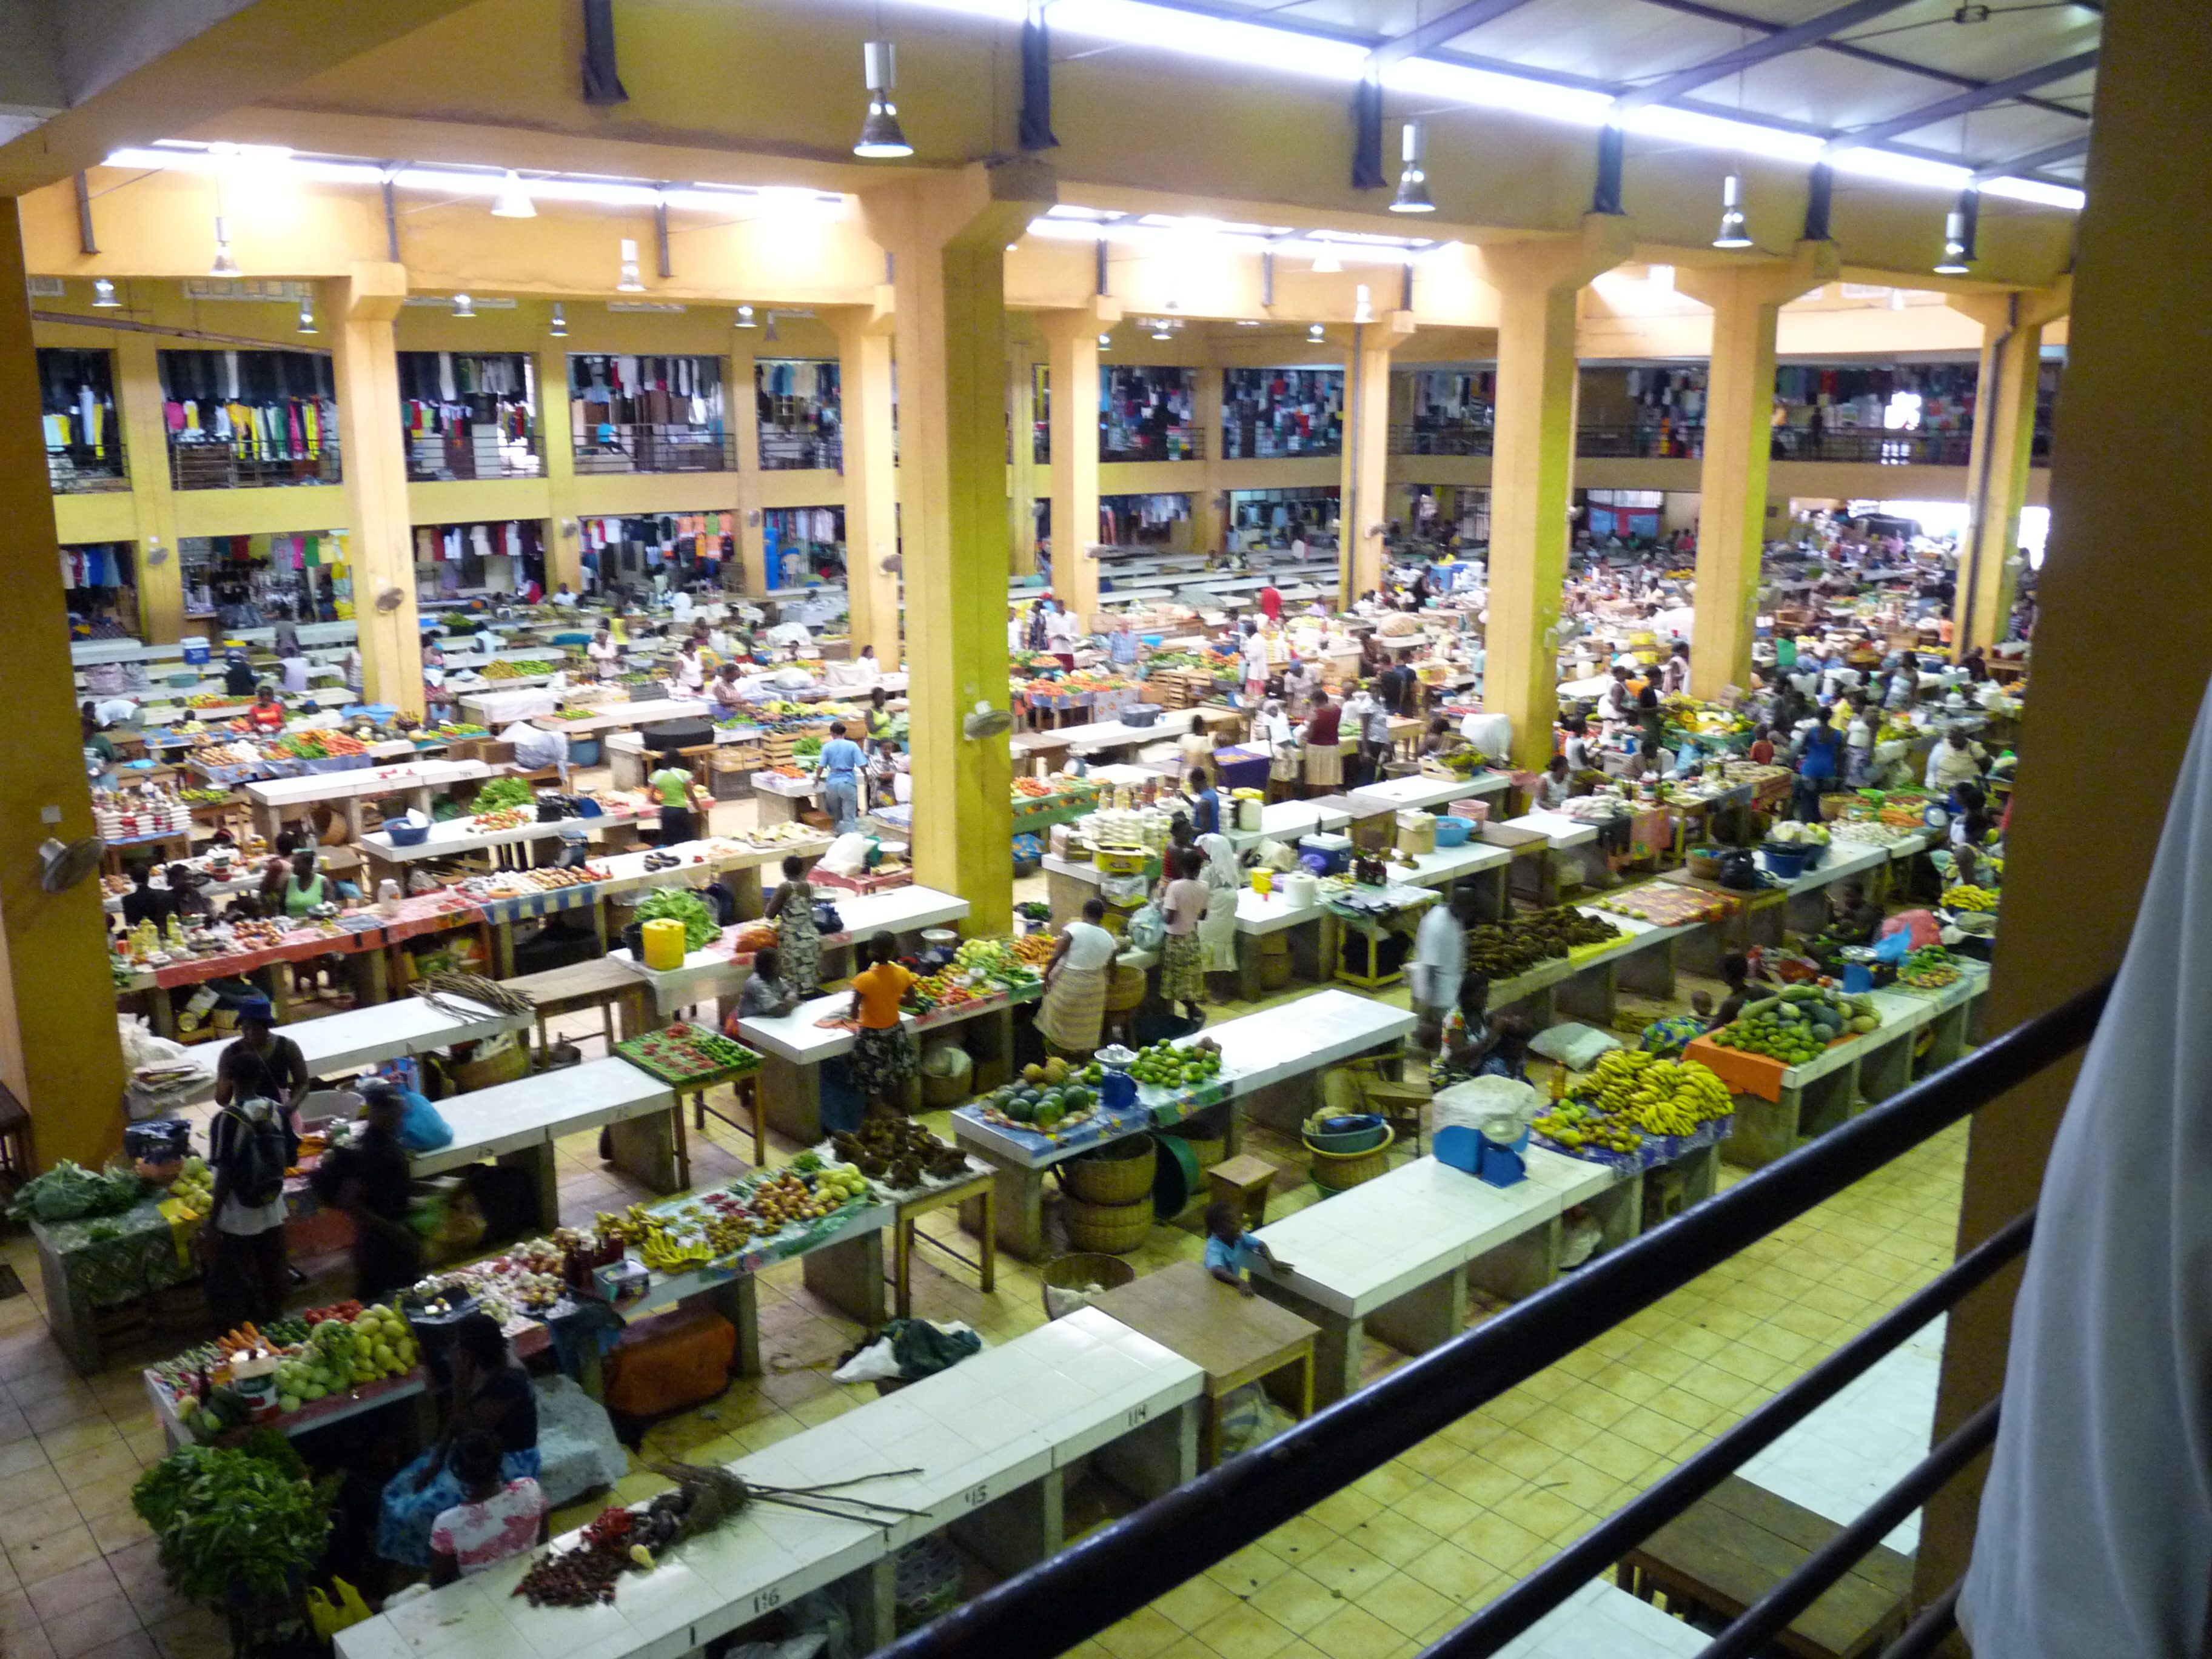 In the capital city, the marketplace serves as a venue for local fishermen and farmers in Sao Tome & Principe. Wikimedia Commons.